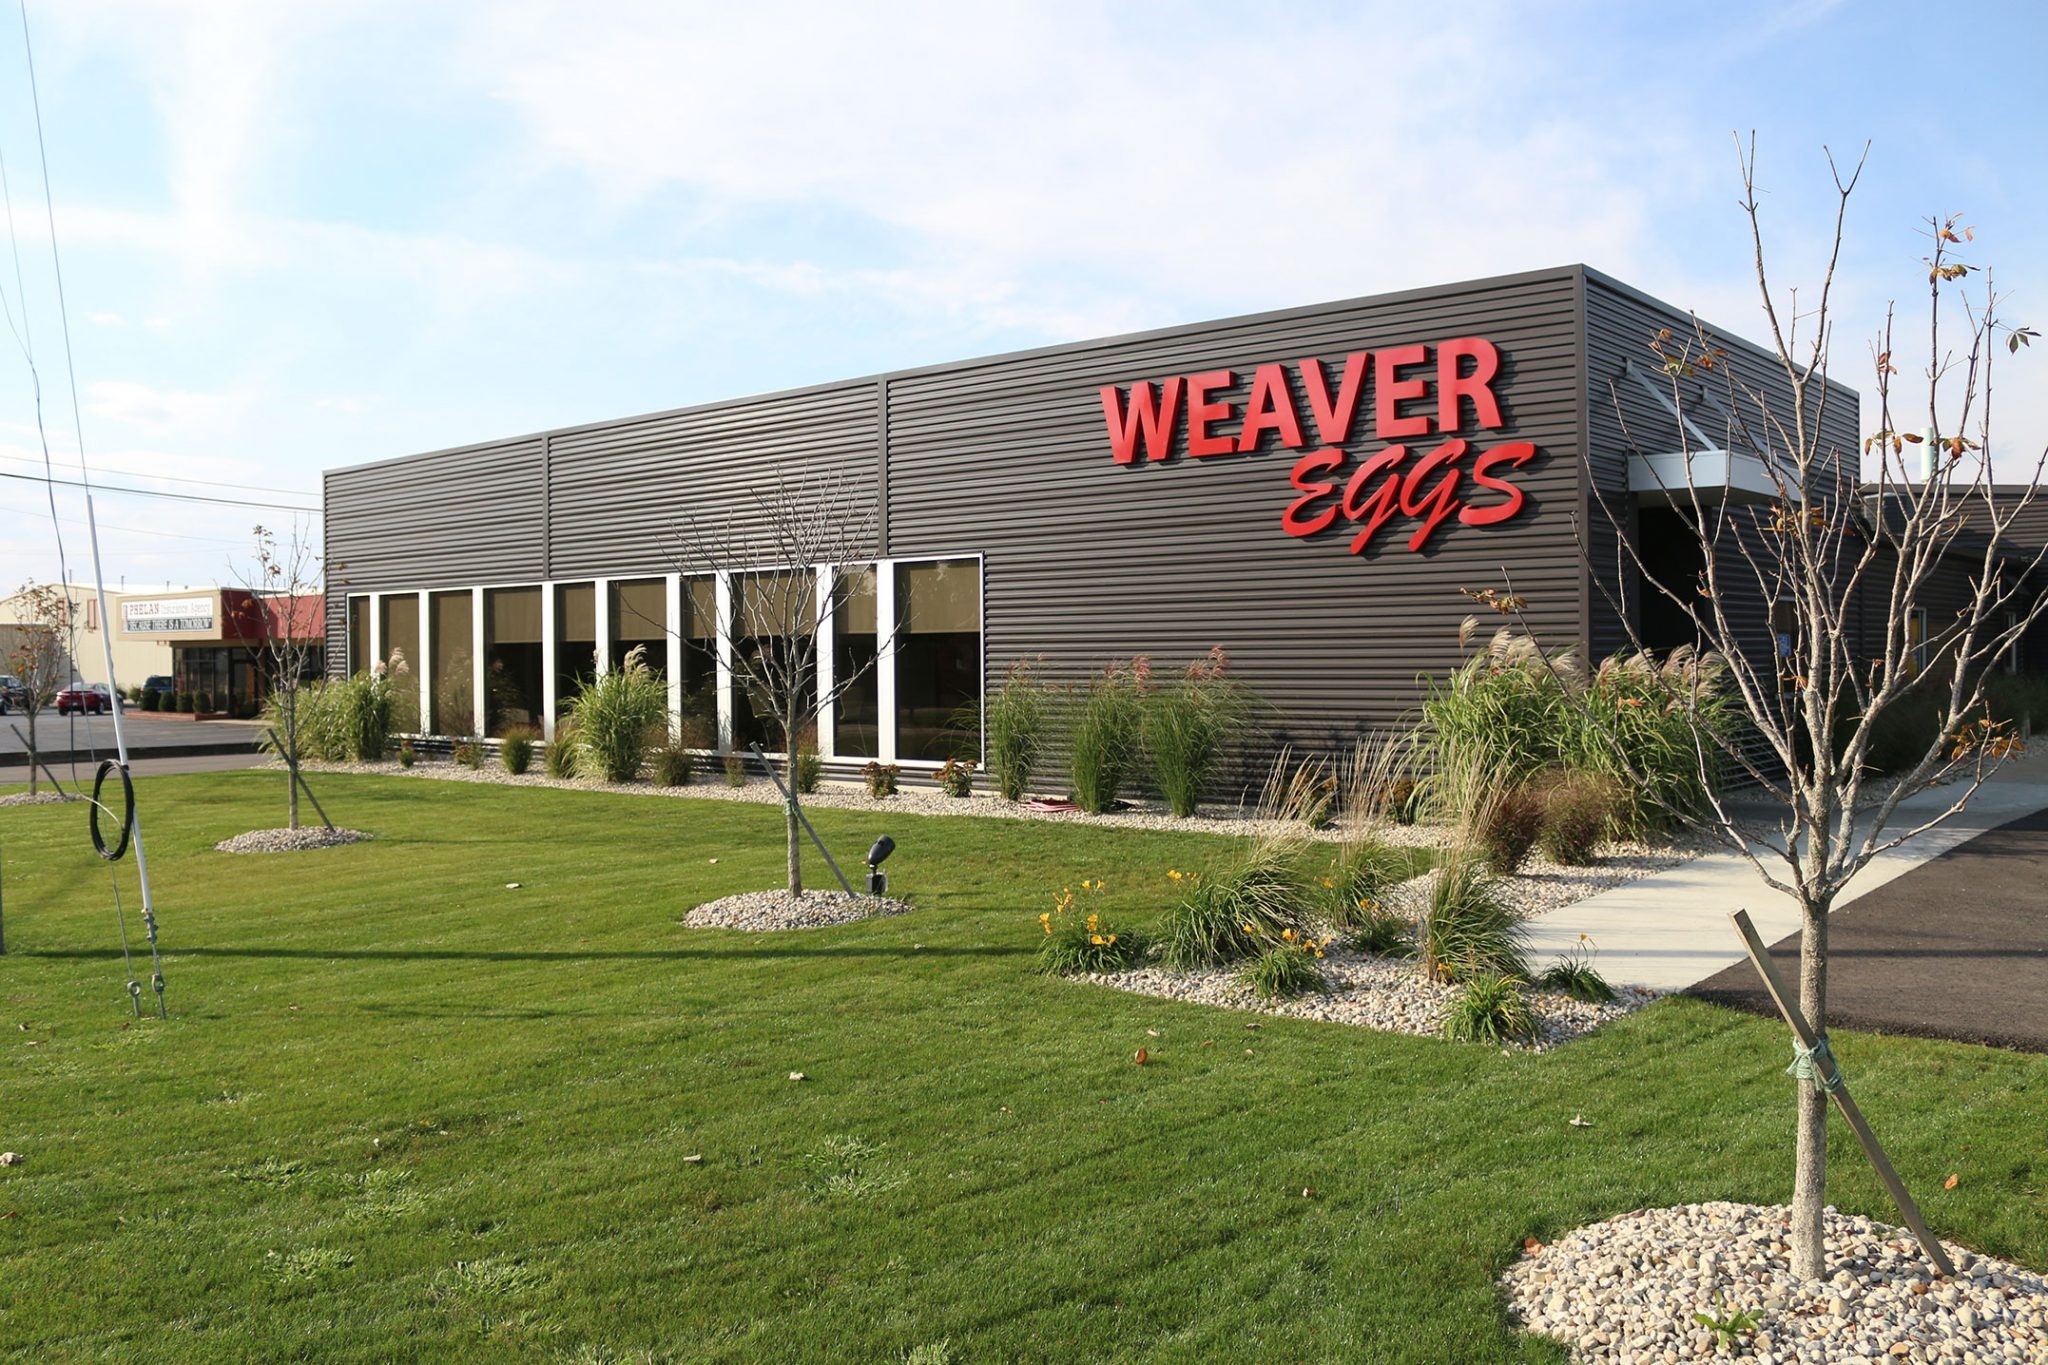 Established in Versailles in 1929, Weaver Brothers, Inc. is another major commercial customer of Versailles Utilities. The family-owned farm produces Egg-Lands Best eggs, Crystal Spring Eggs, Crystal Farms cheeses and numerous other products. The company is one of the largest employers in Versailles and has long prided itself on being an integral part of the community, giving great care to their environmental practices.